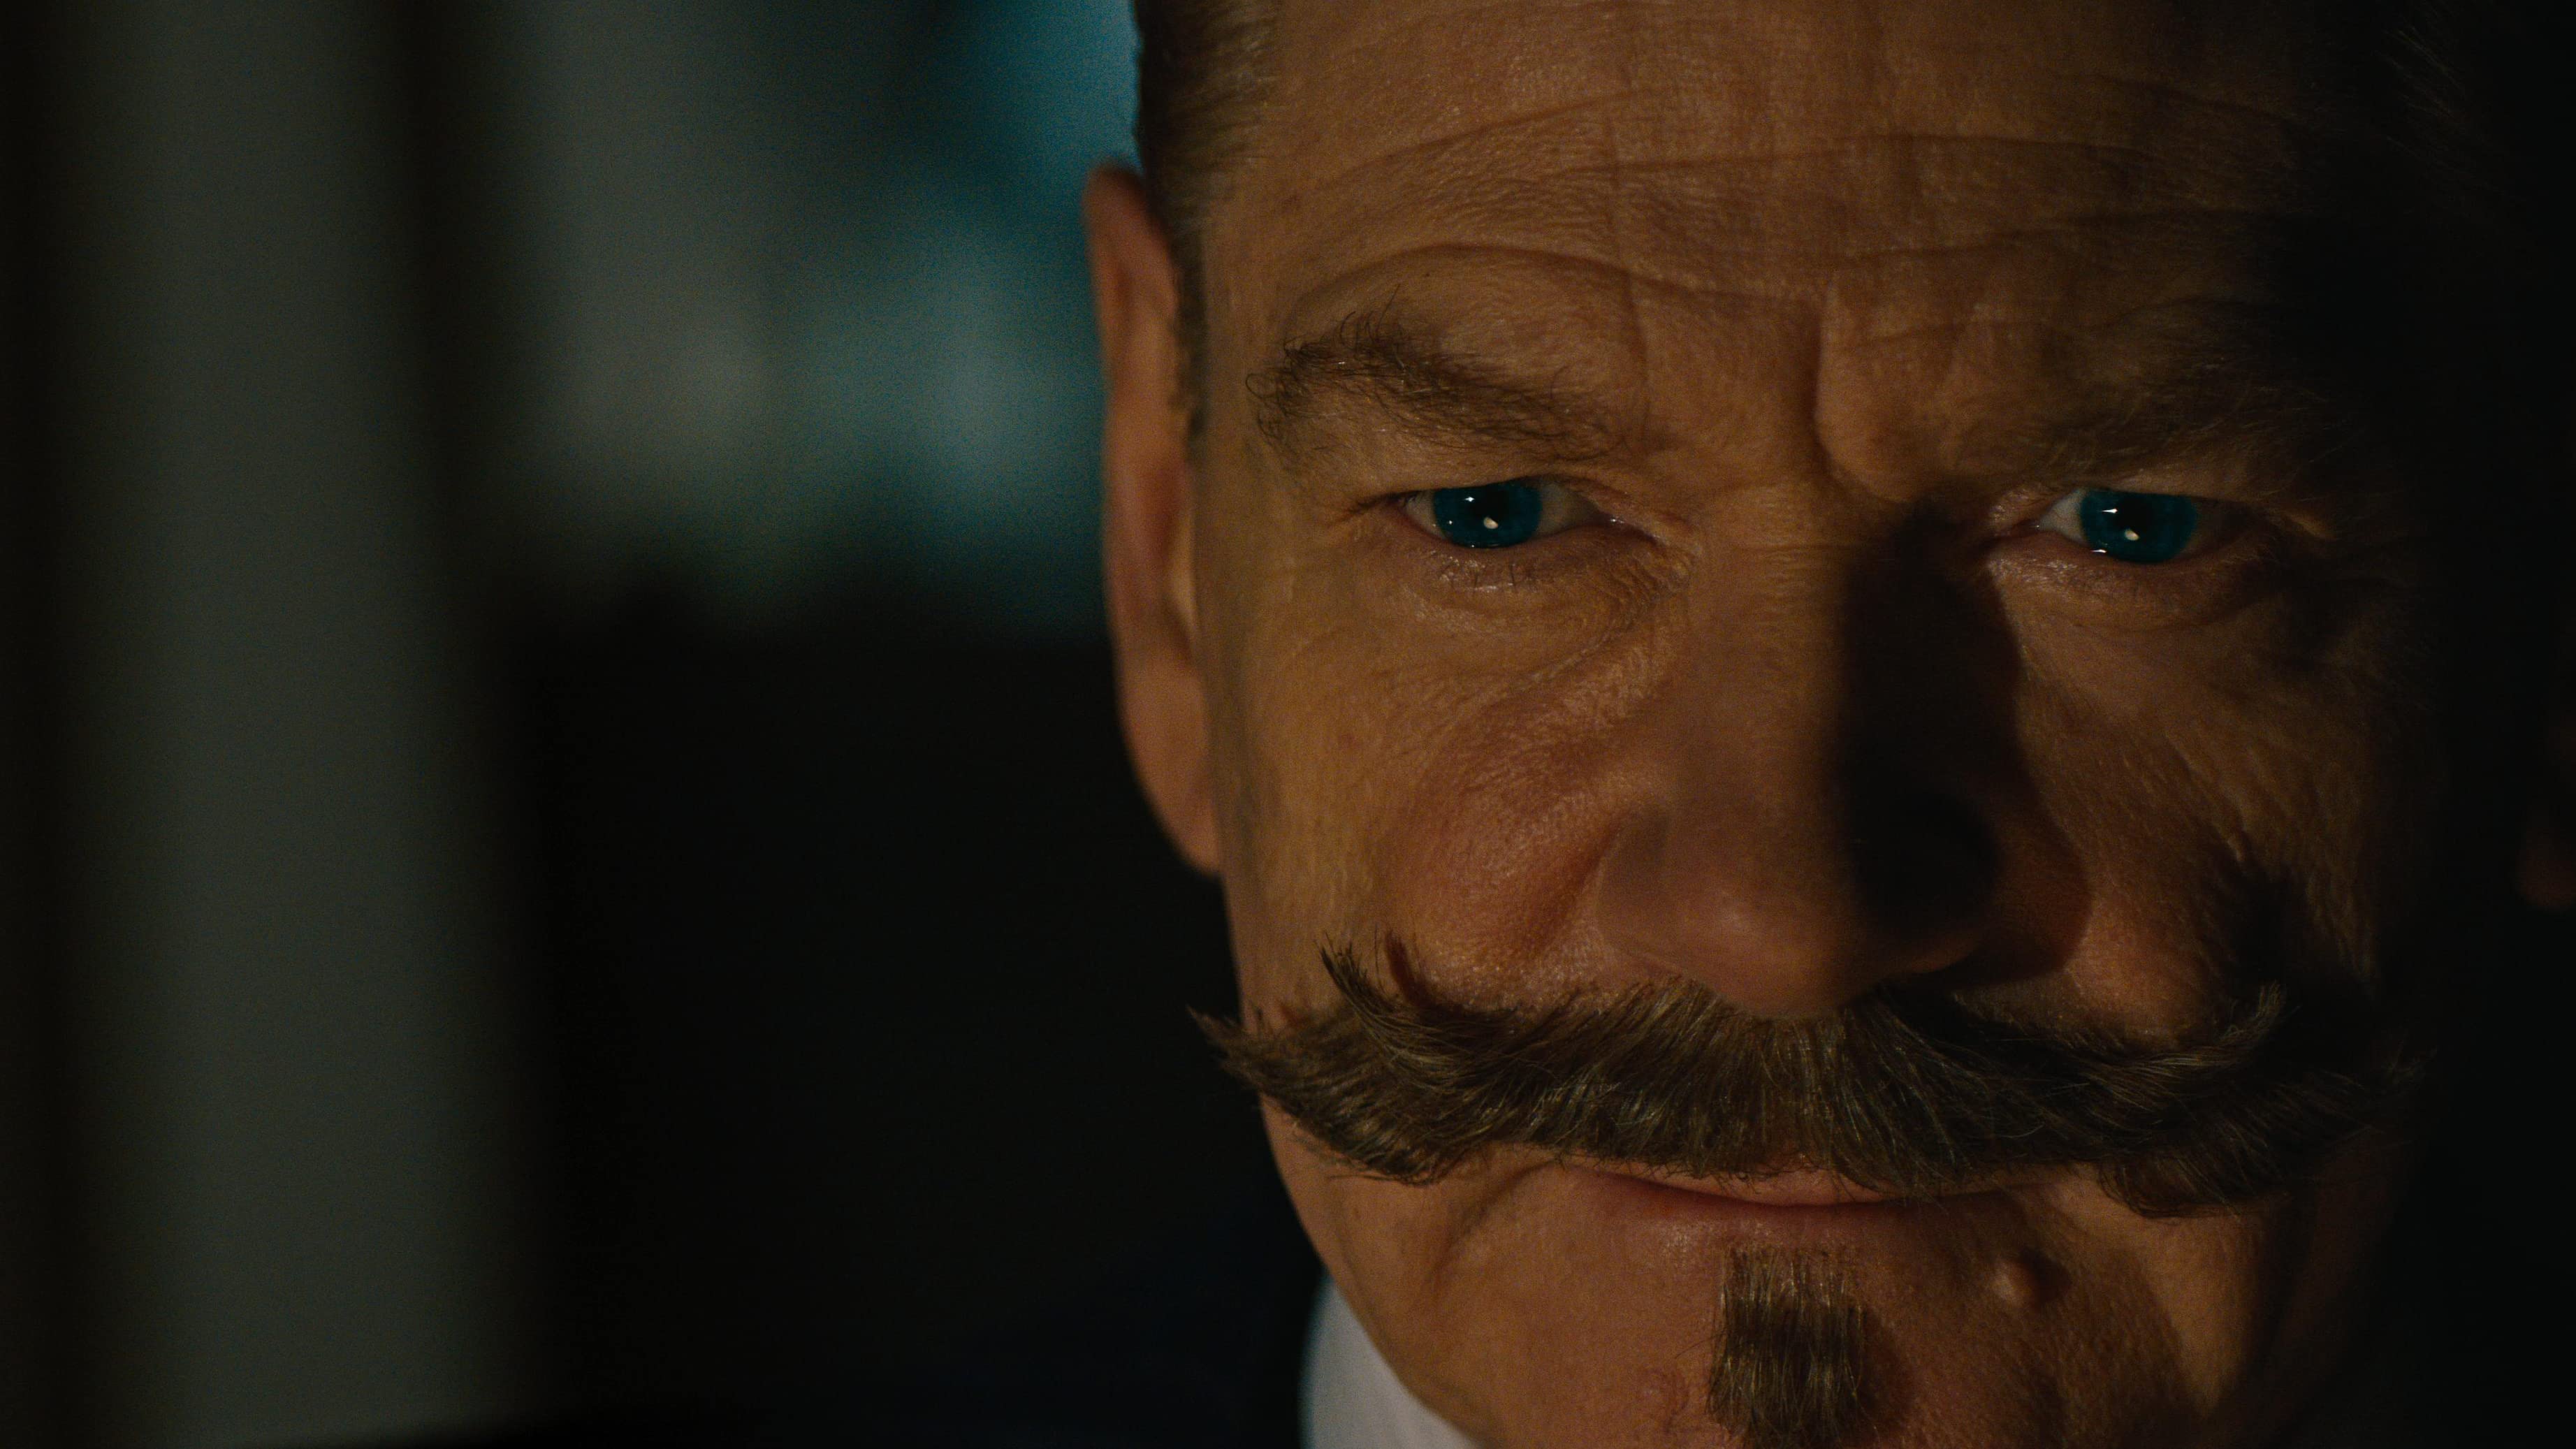 Hercule Poirot is Back in a New Trailer For ‘A Haunting in Venice’